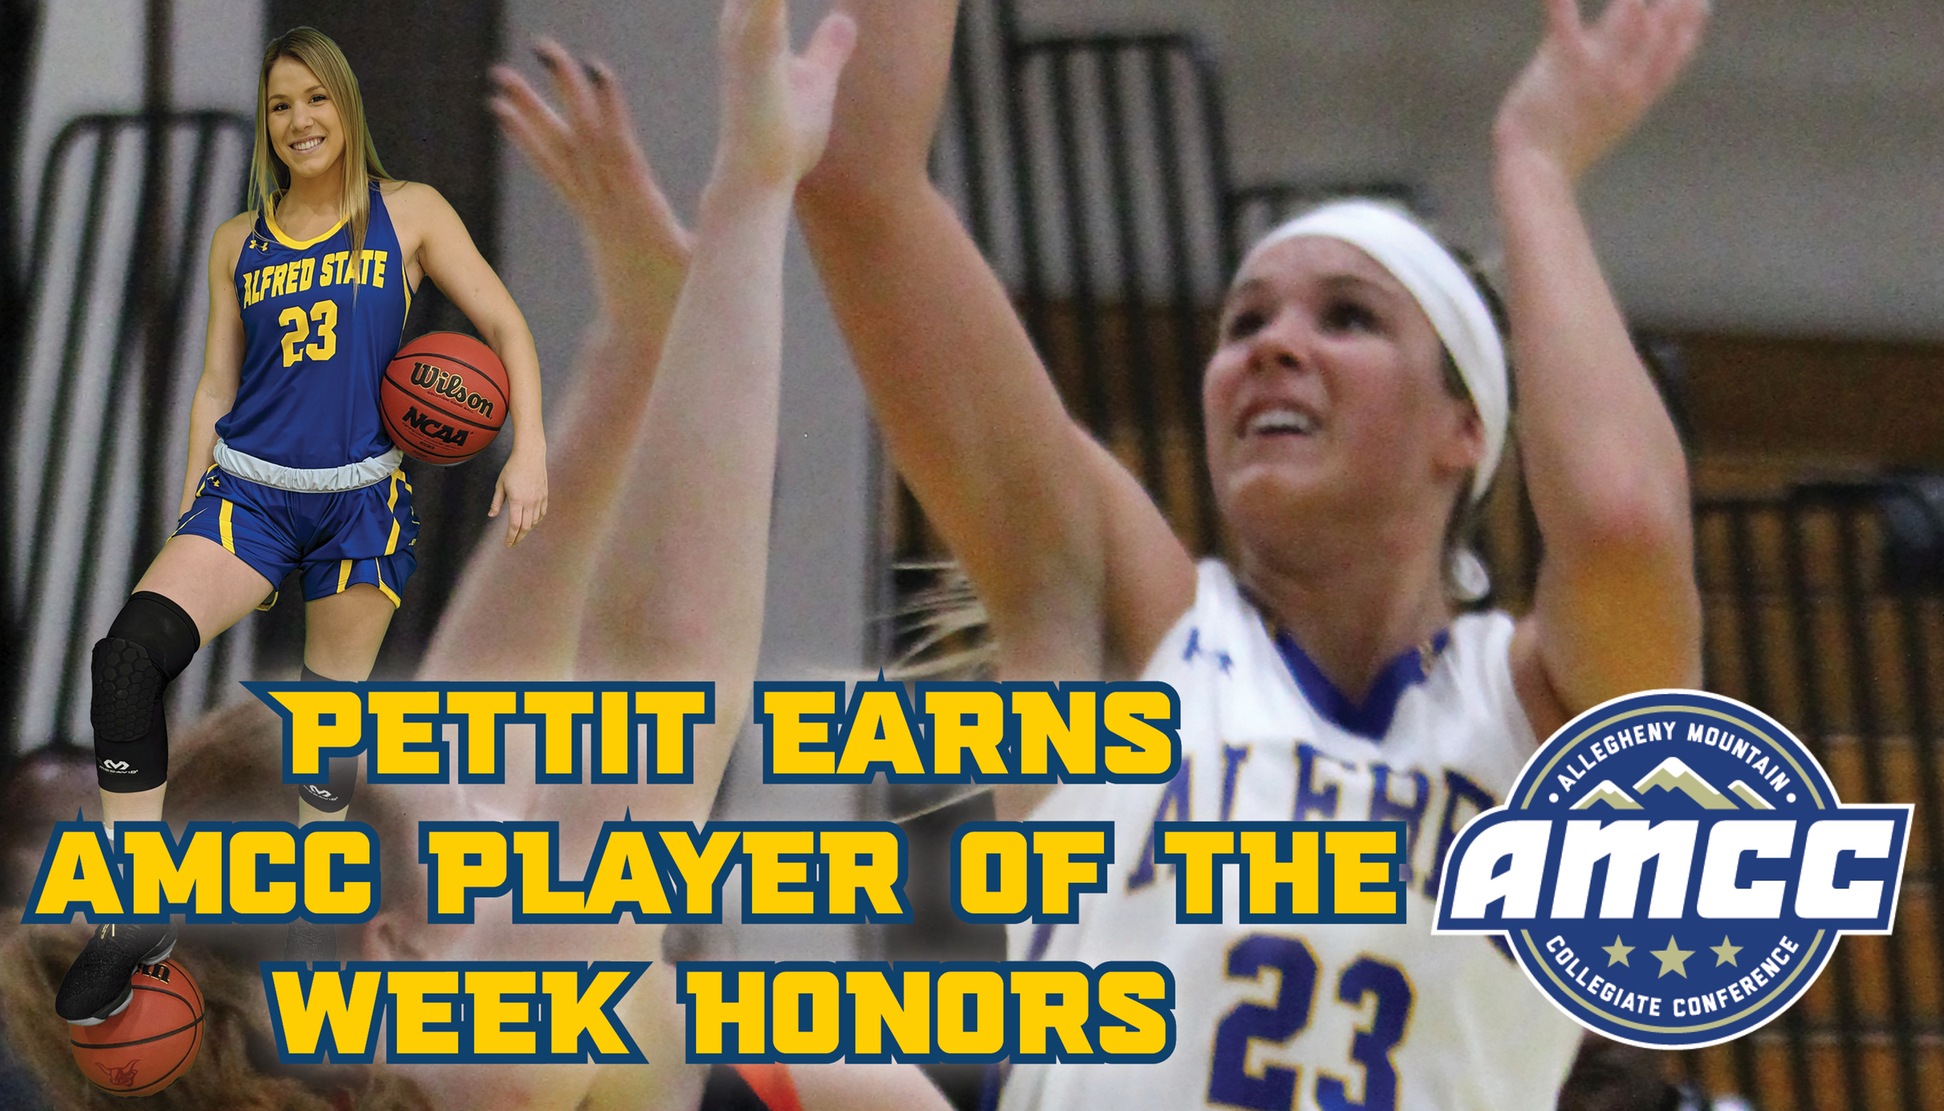 Pettit named AMCC Player of the Week